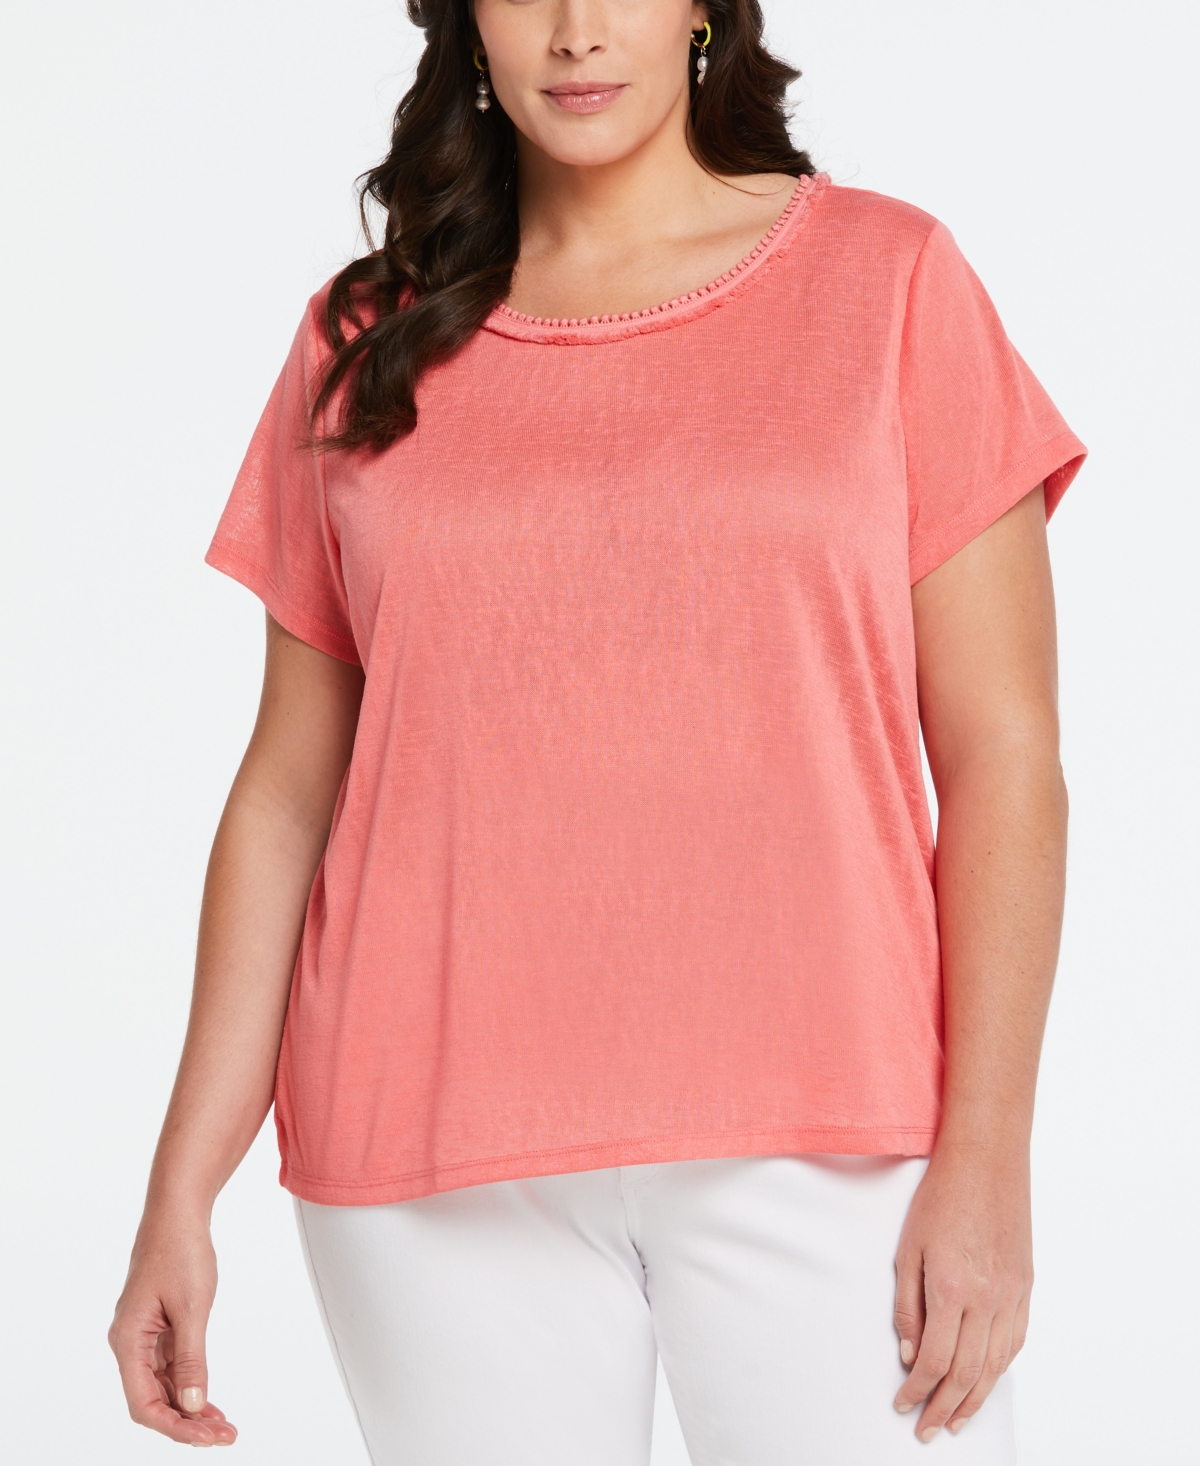 Plus Size Eco Fabric Short Sleeve Top with Decorative Trim - Sun Kissed Coral